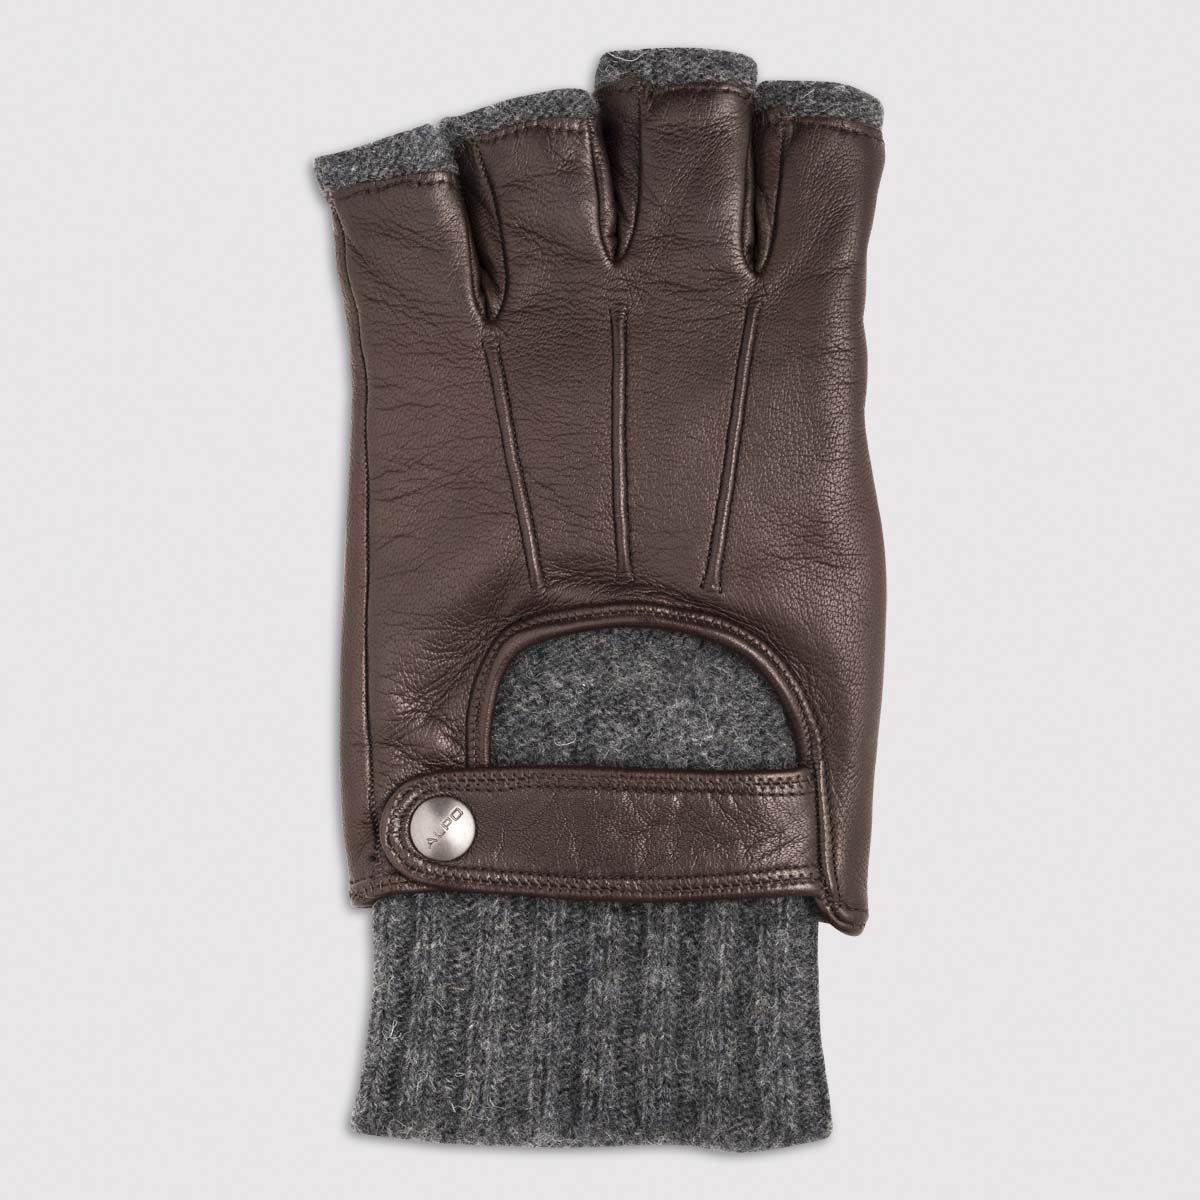 Half-Finger Nappa Leather Glove with Wool Lining in Mocca Alpo Guanti on sale 2022